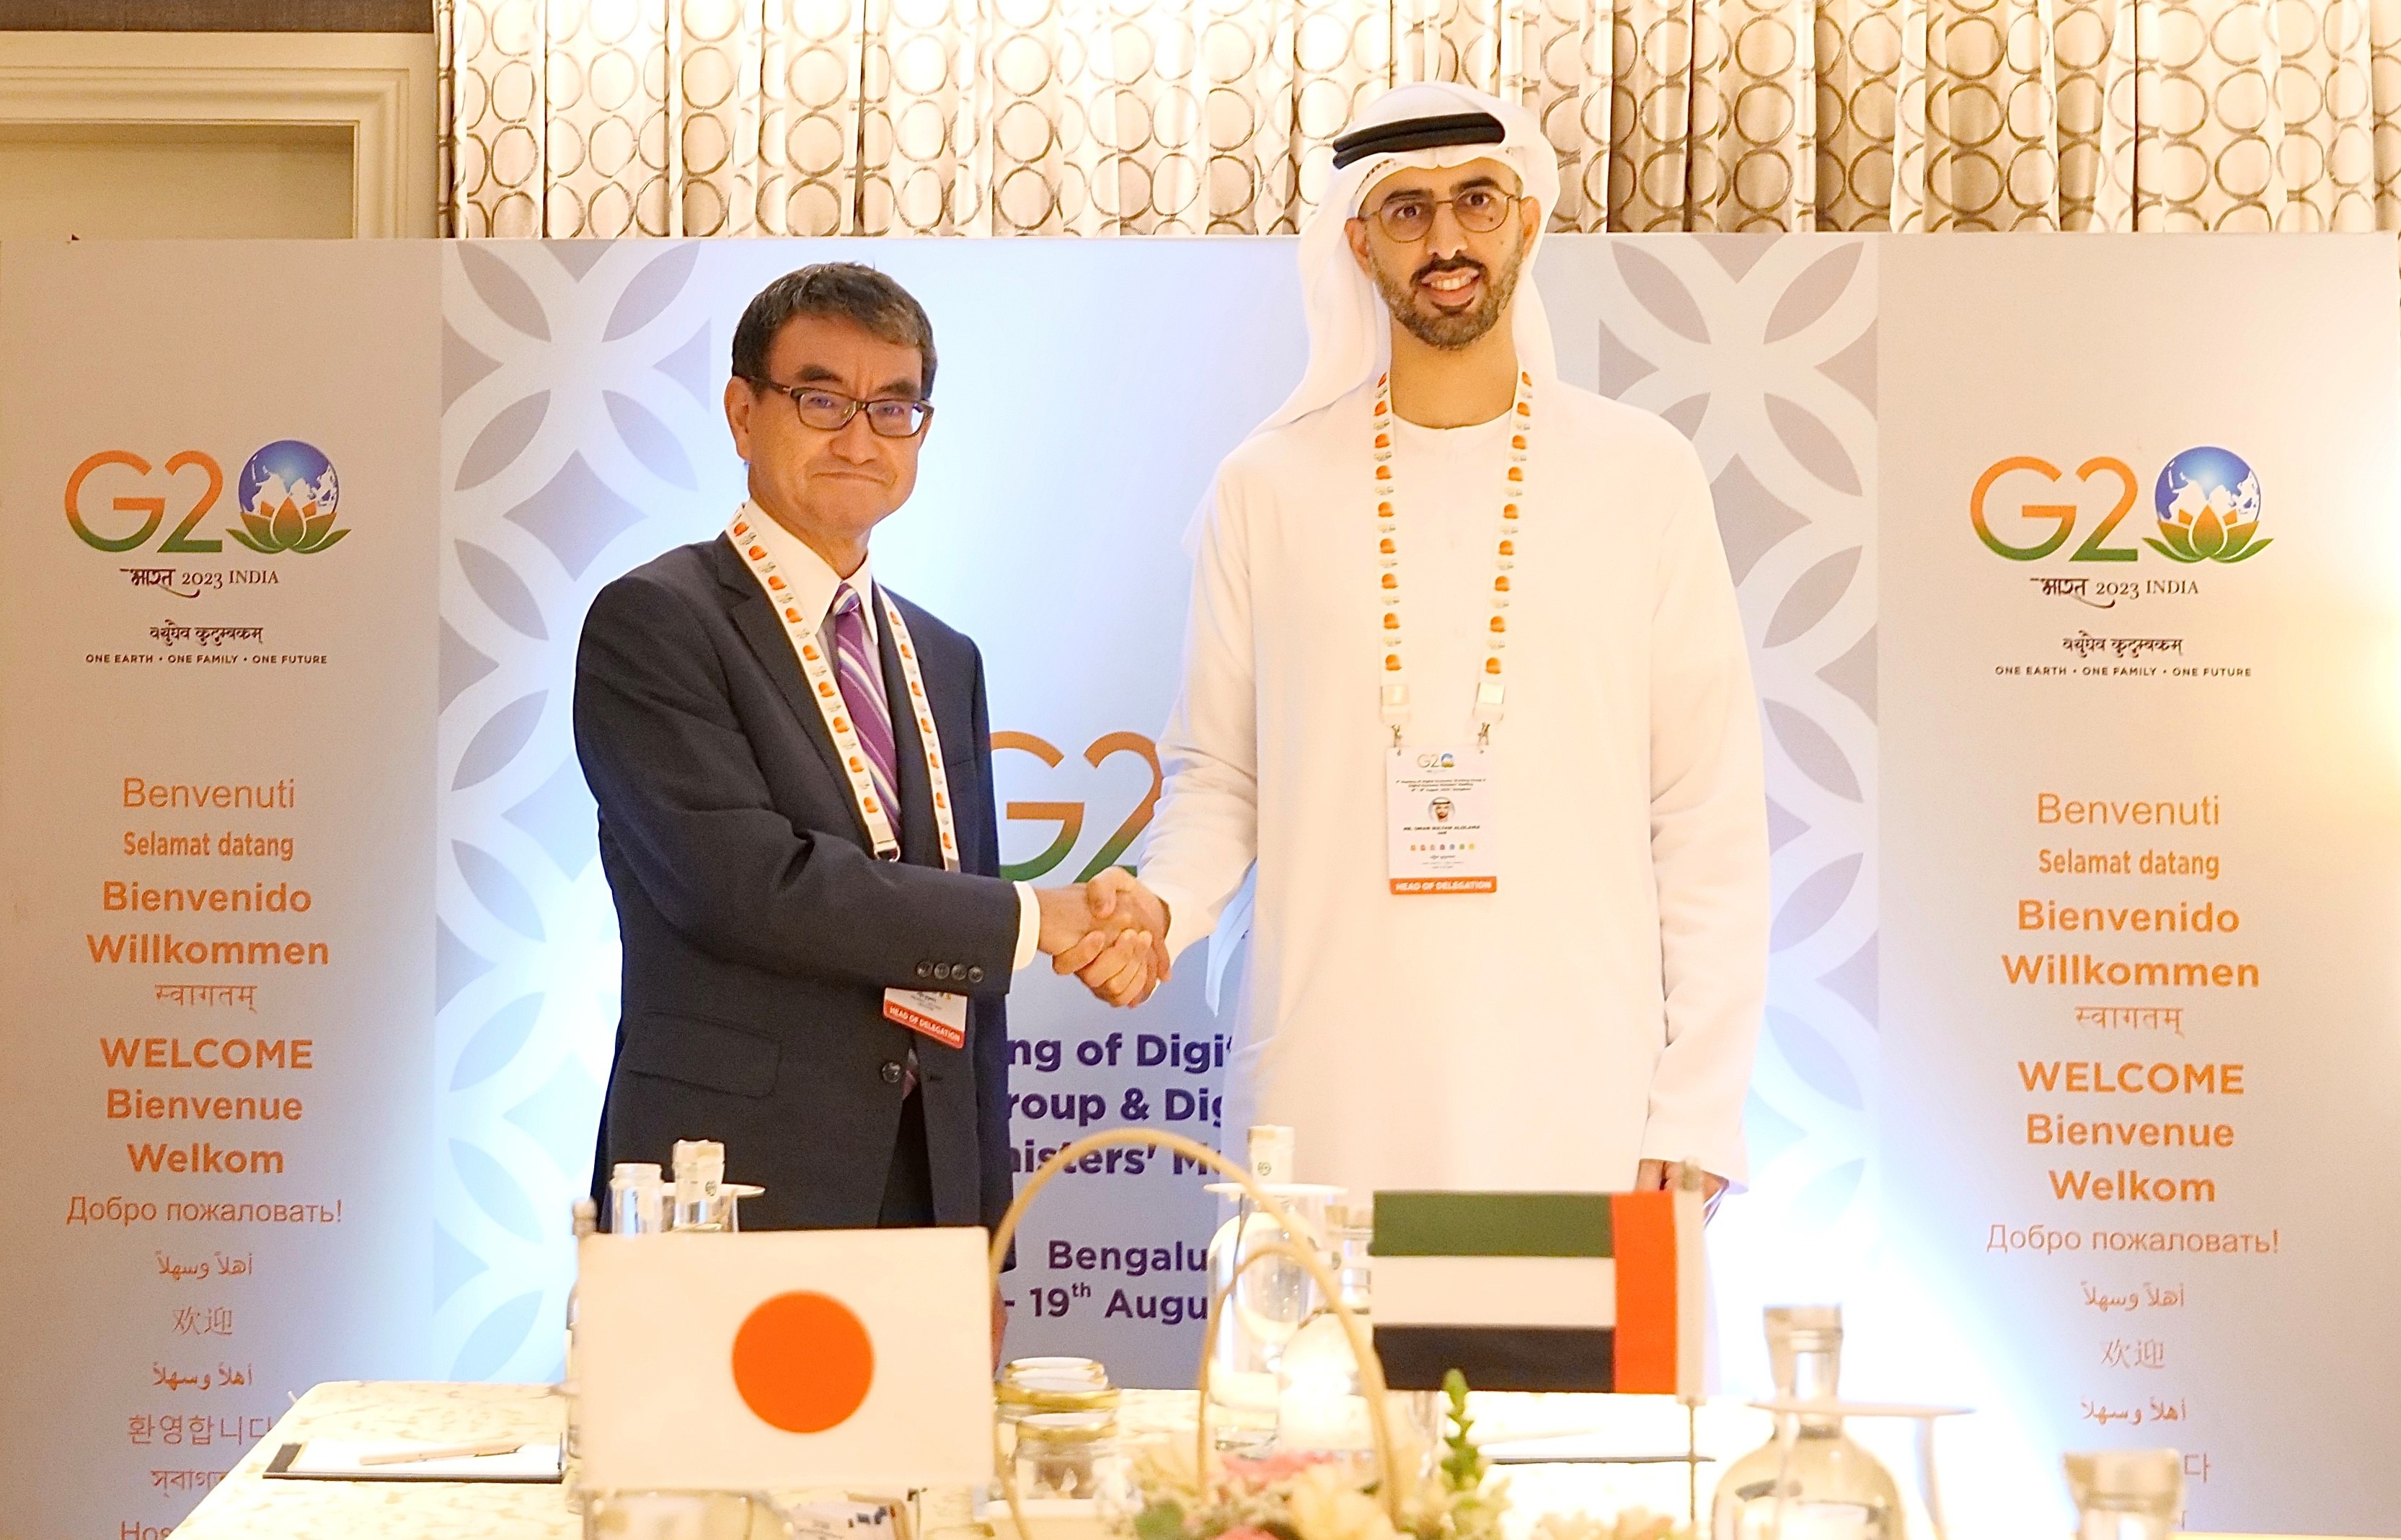 Photo of Minister Olama of UAE (right) and Minister Kono (left) shaking hands.